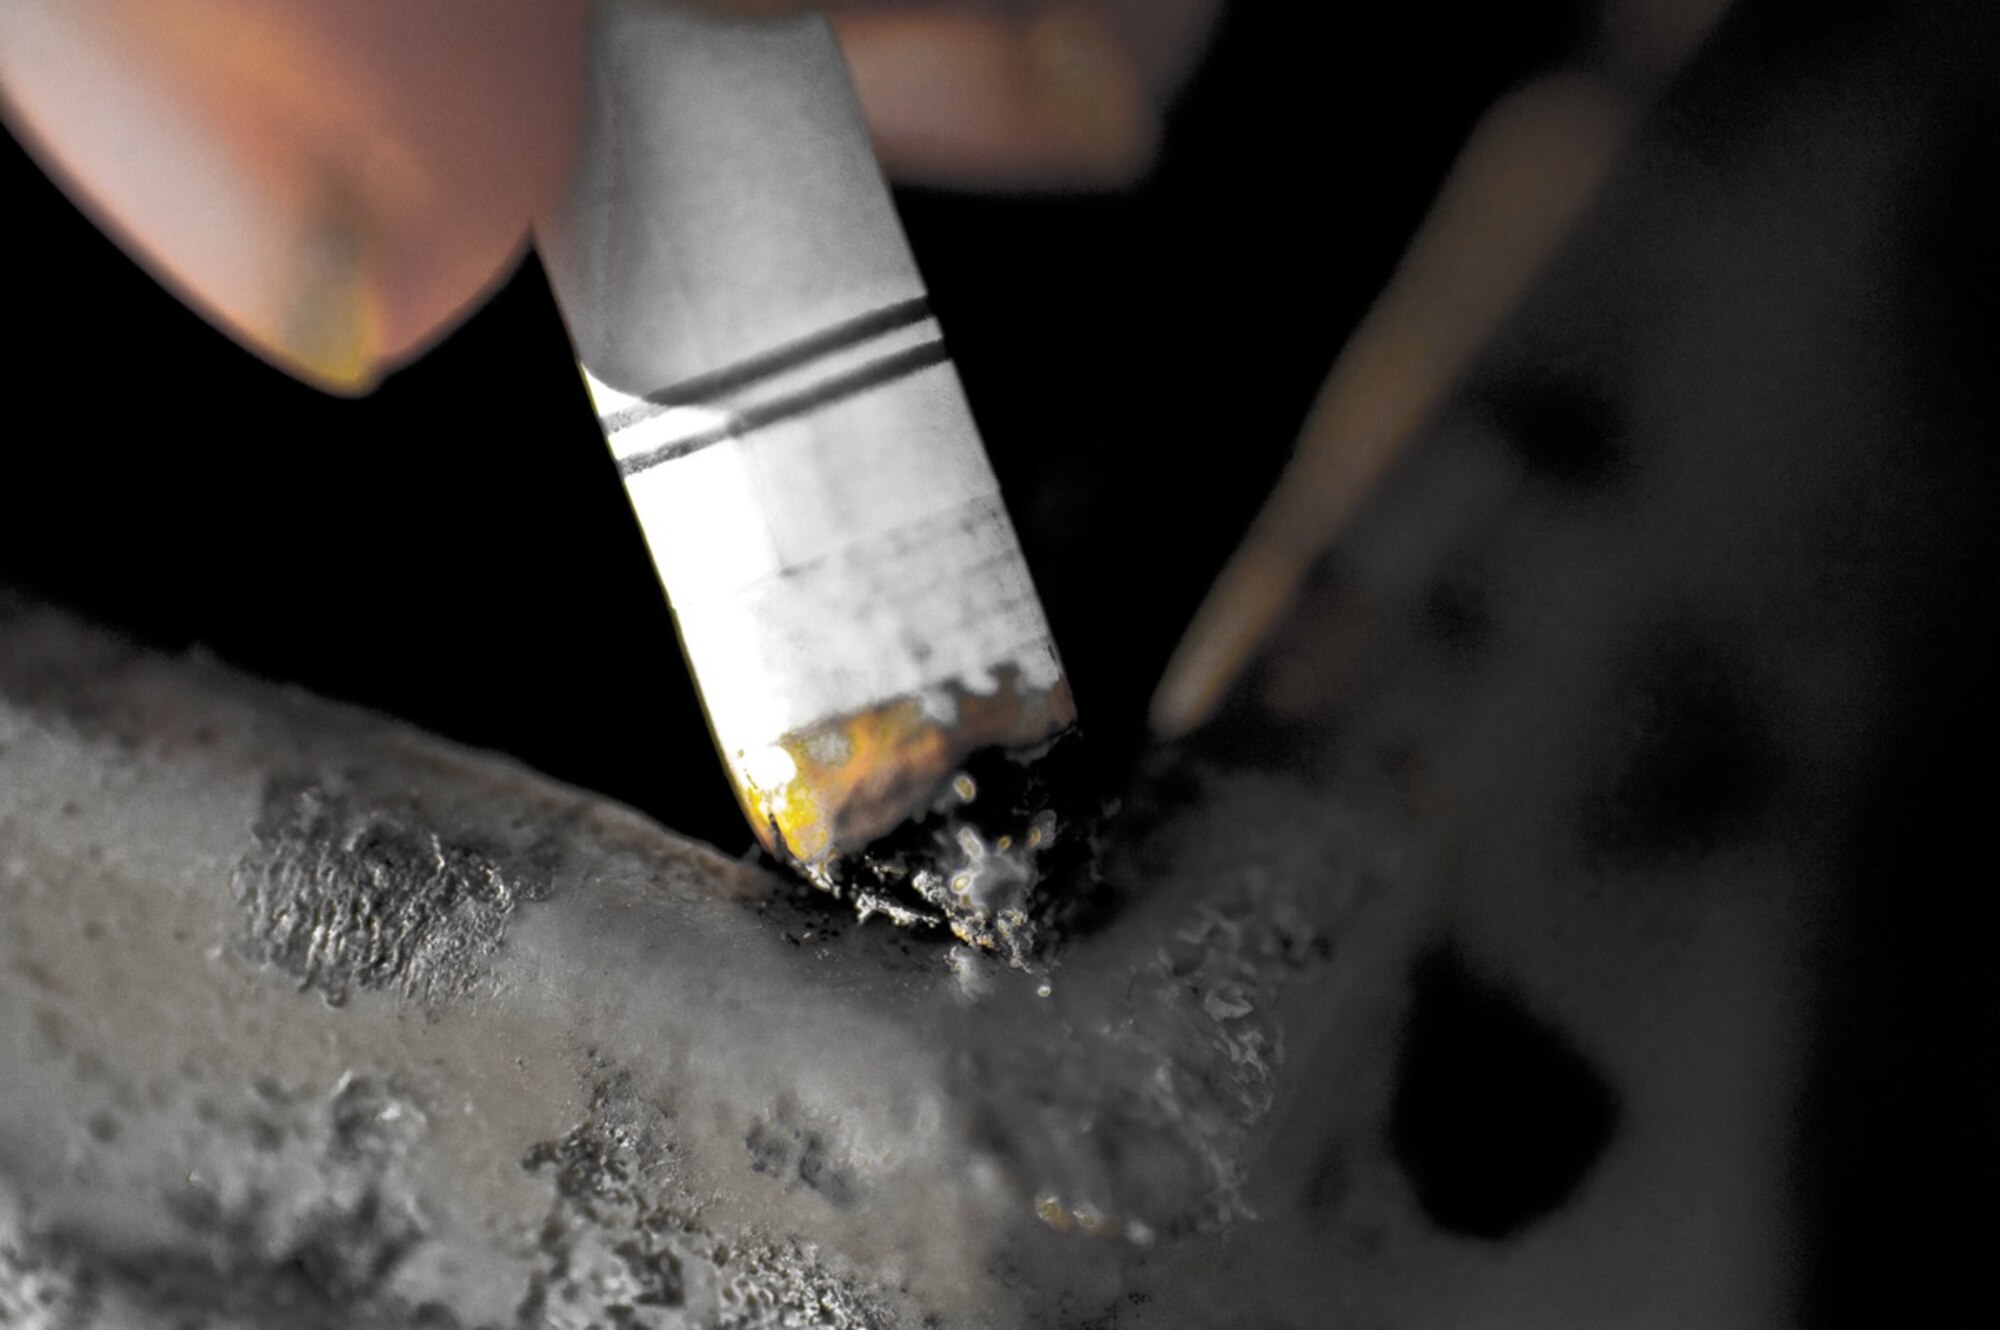 Members of the 501st Combat Support Wing are encouraged to seek out help in quitting smoking. Contact the 423rd Medical Squadron health promotion office, at 314-268-4603 for more information. (U.S. Air Force photo by Airman 1st Class Jack Sanders)